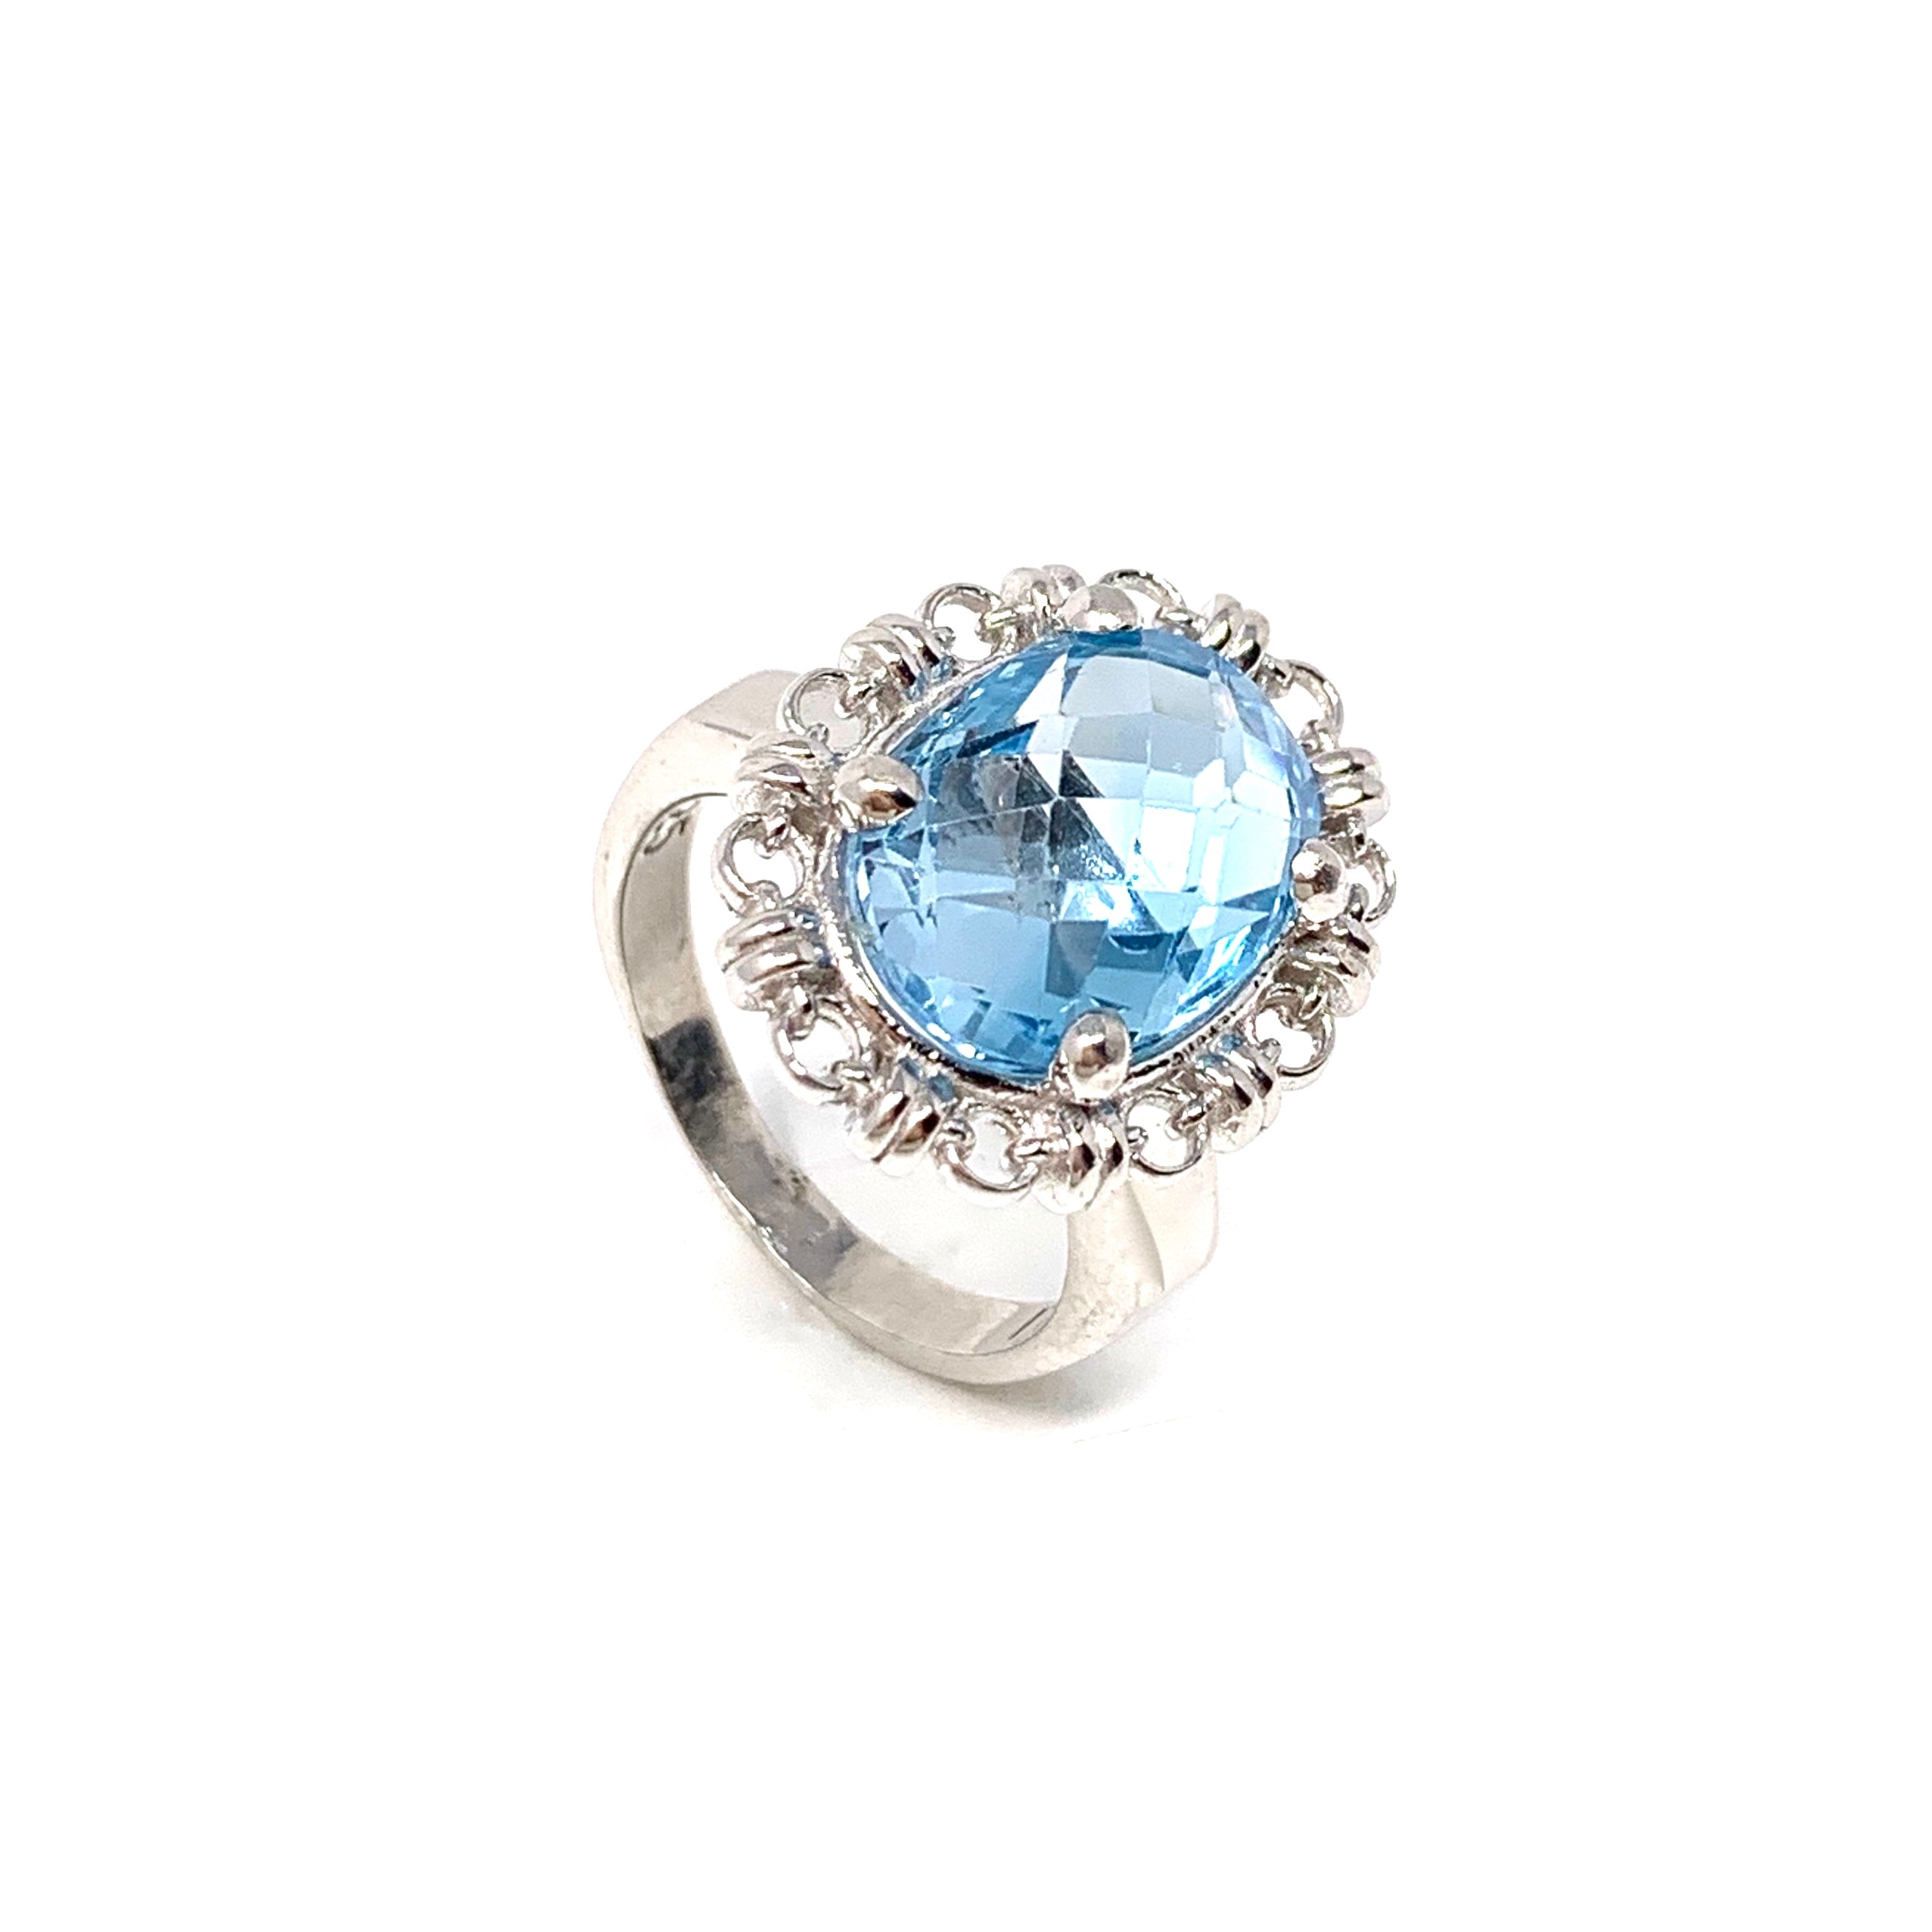 Aperitivo Ring in Silver with Blue Topaz